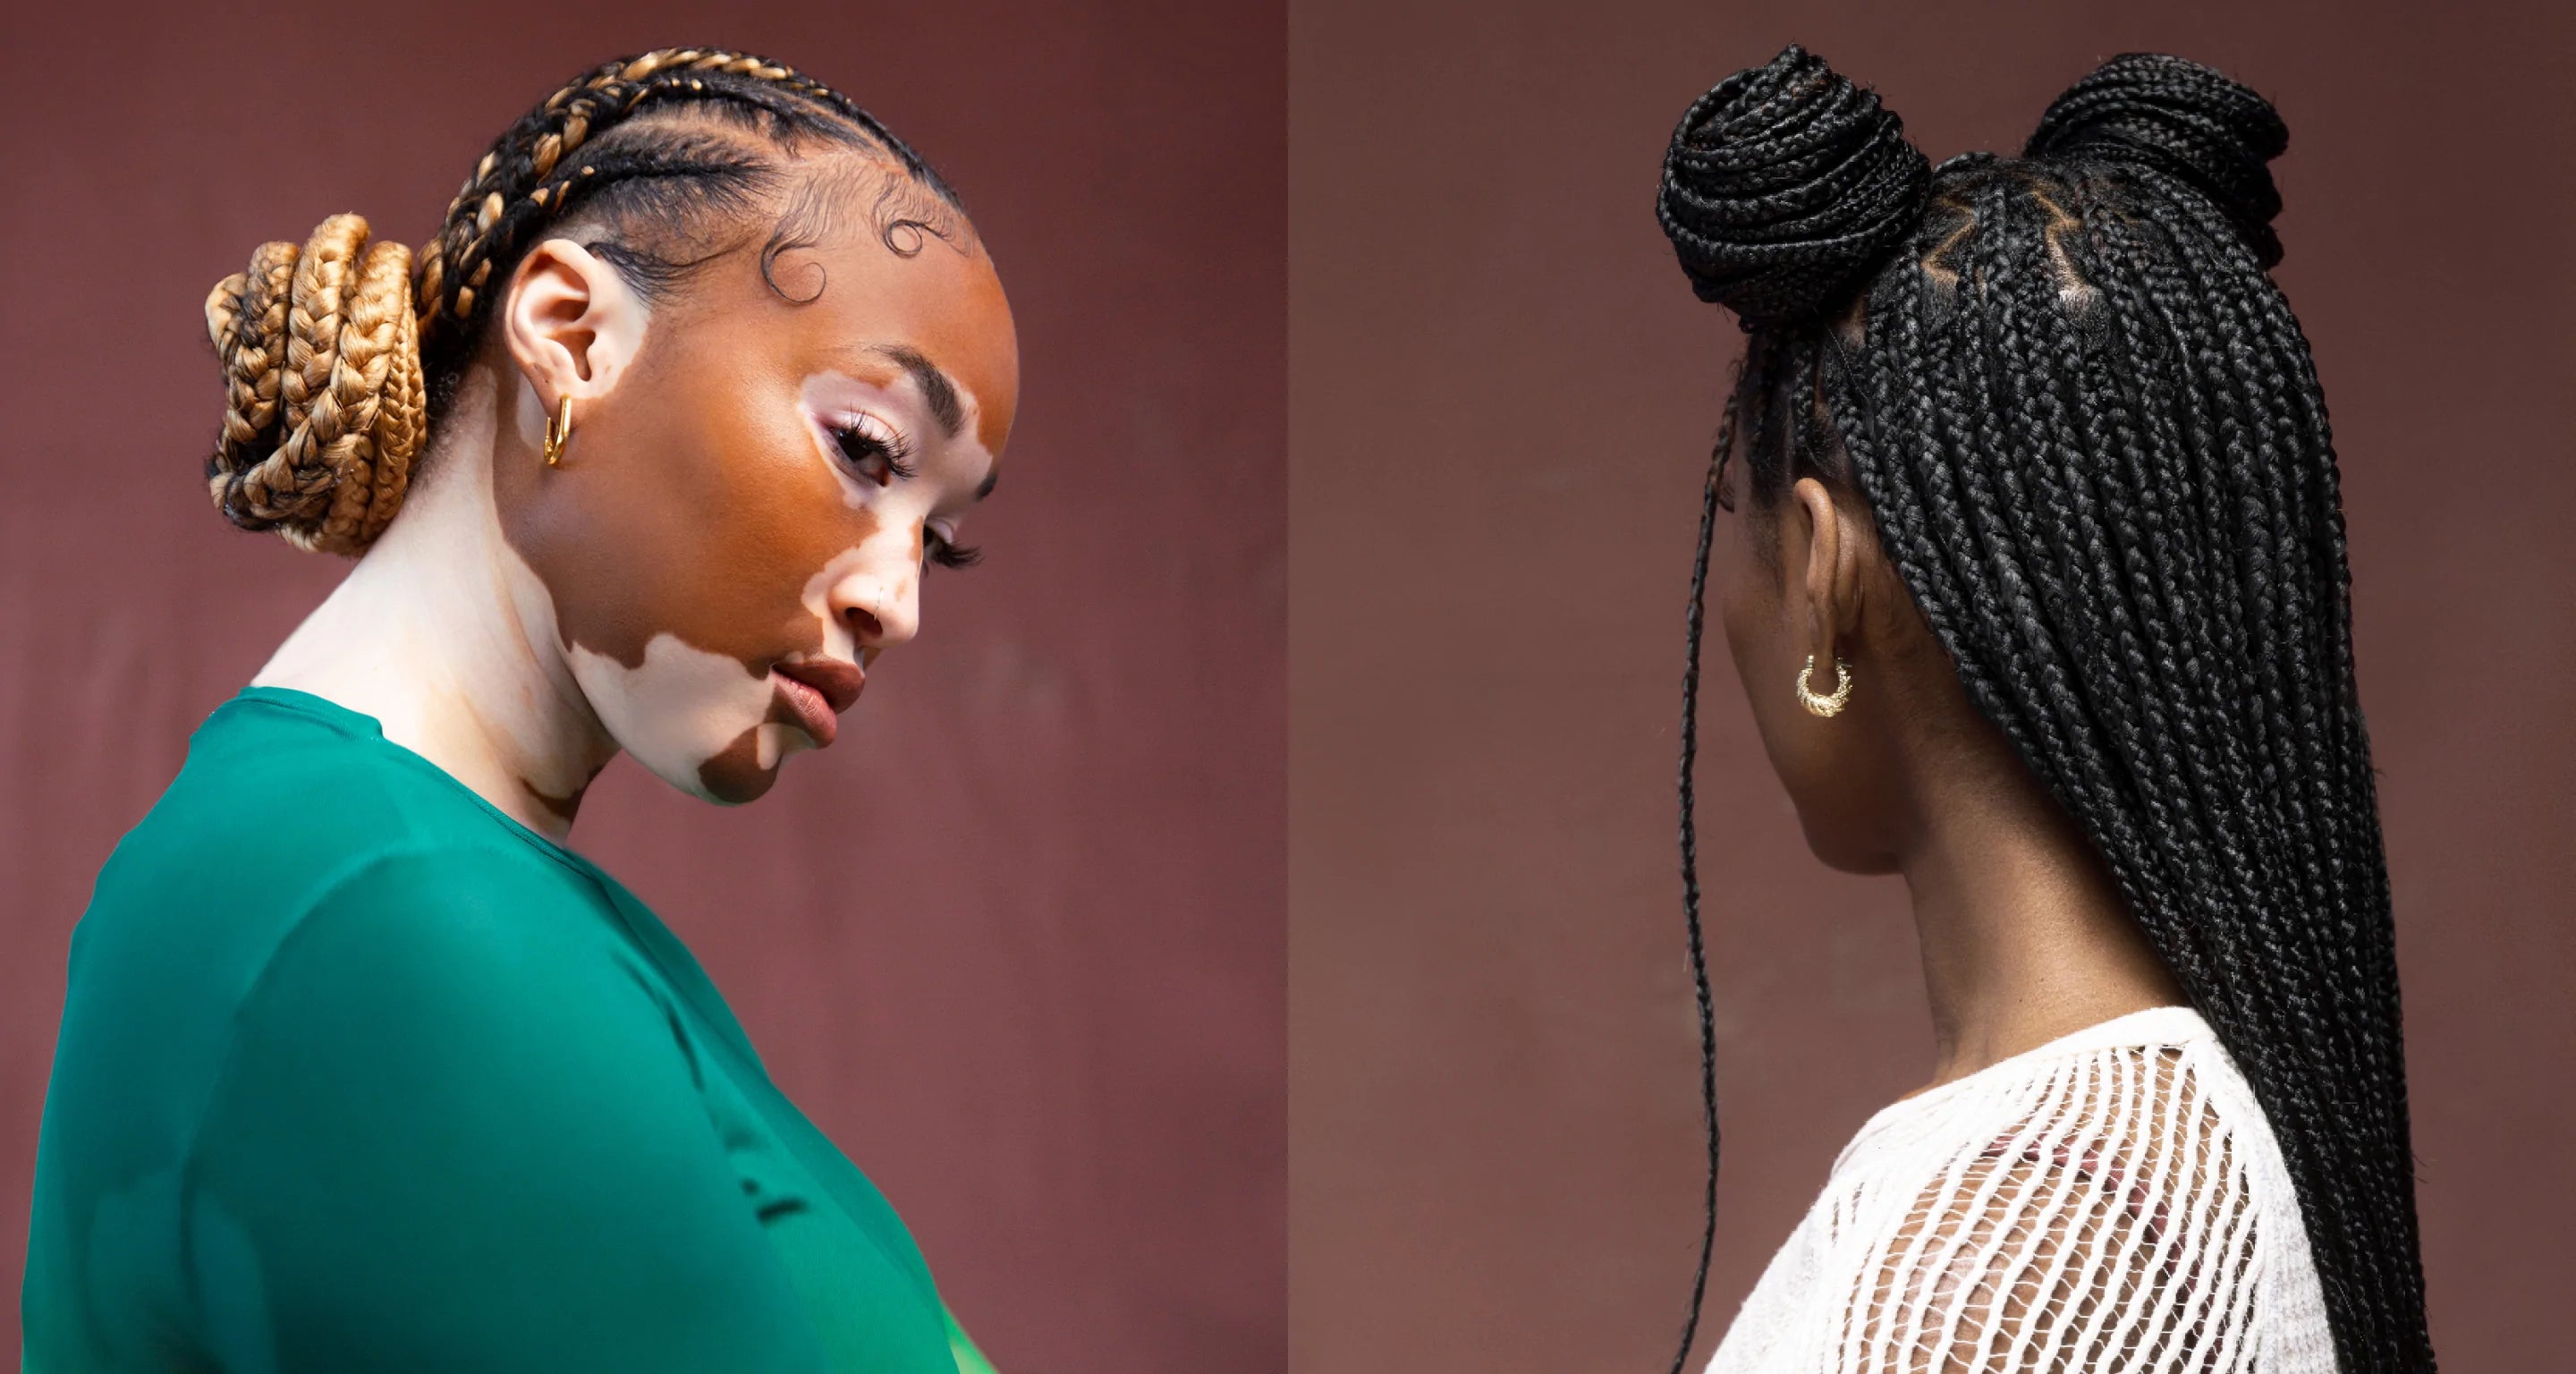 Toxin-Free Braiding Hair Is Eco-Friendly and Biodegradable